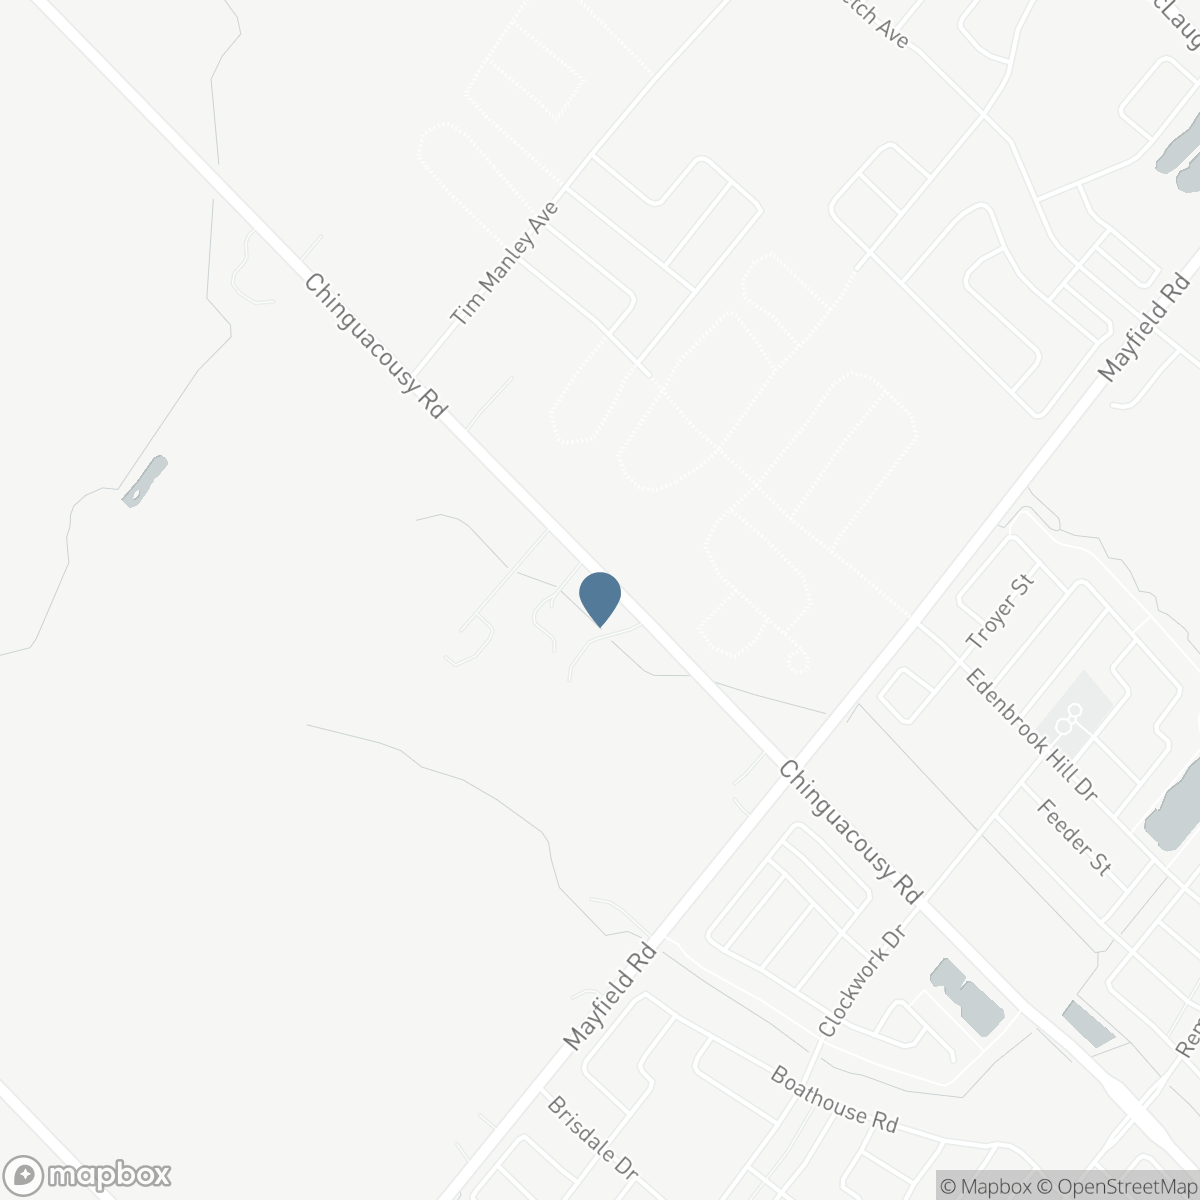 0 CHINGUACOUSY RD, Caledon, Ontario L7C 3G4